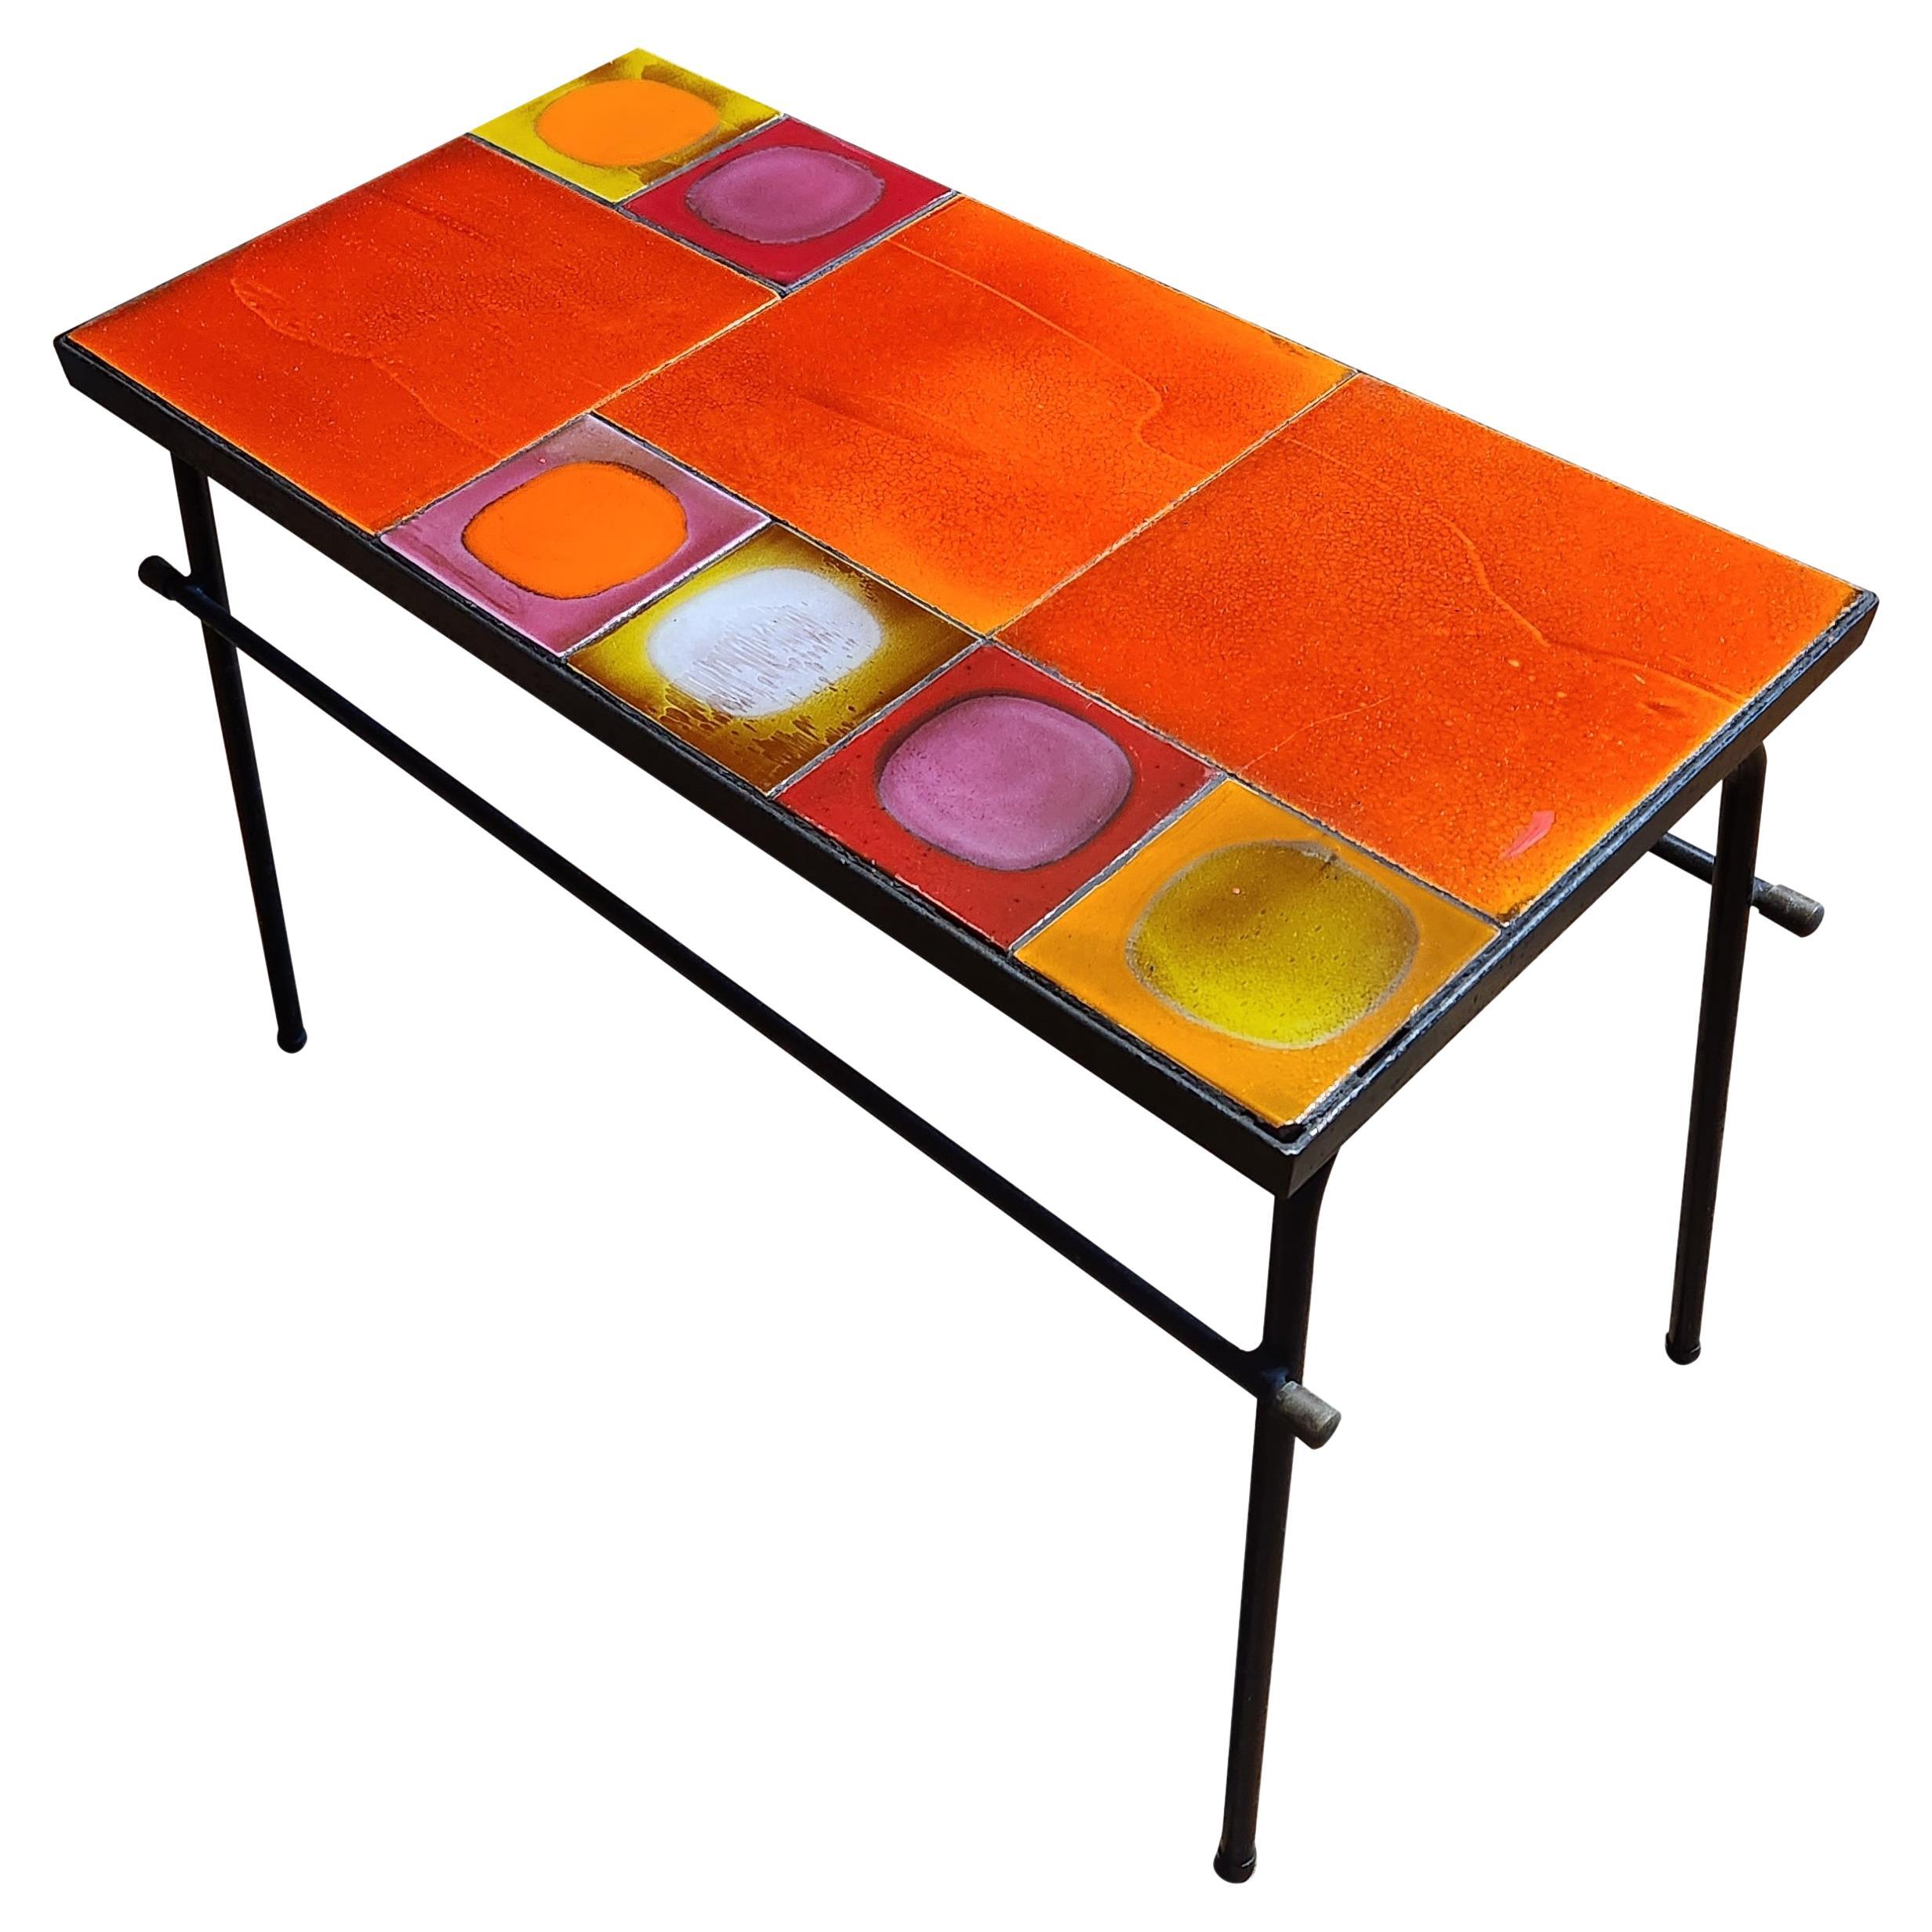 Gueridon Coffee Table with Colorful Ceramic Tiles by Roger Capron